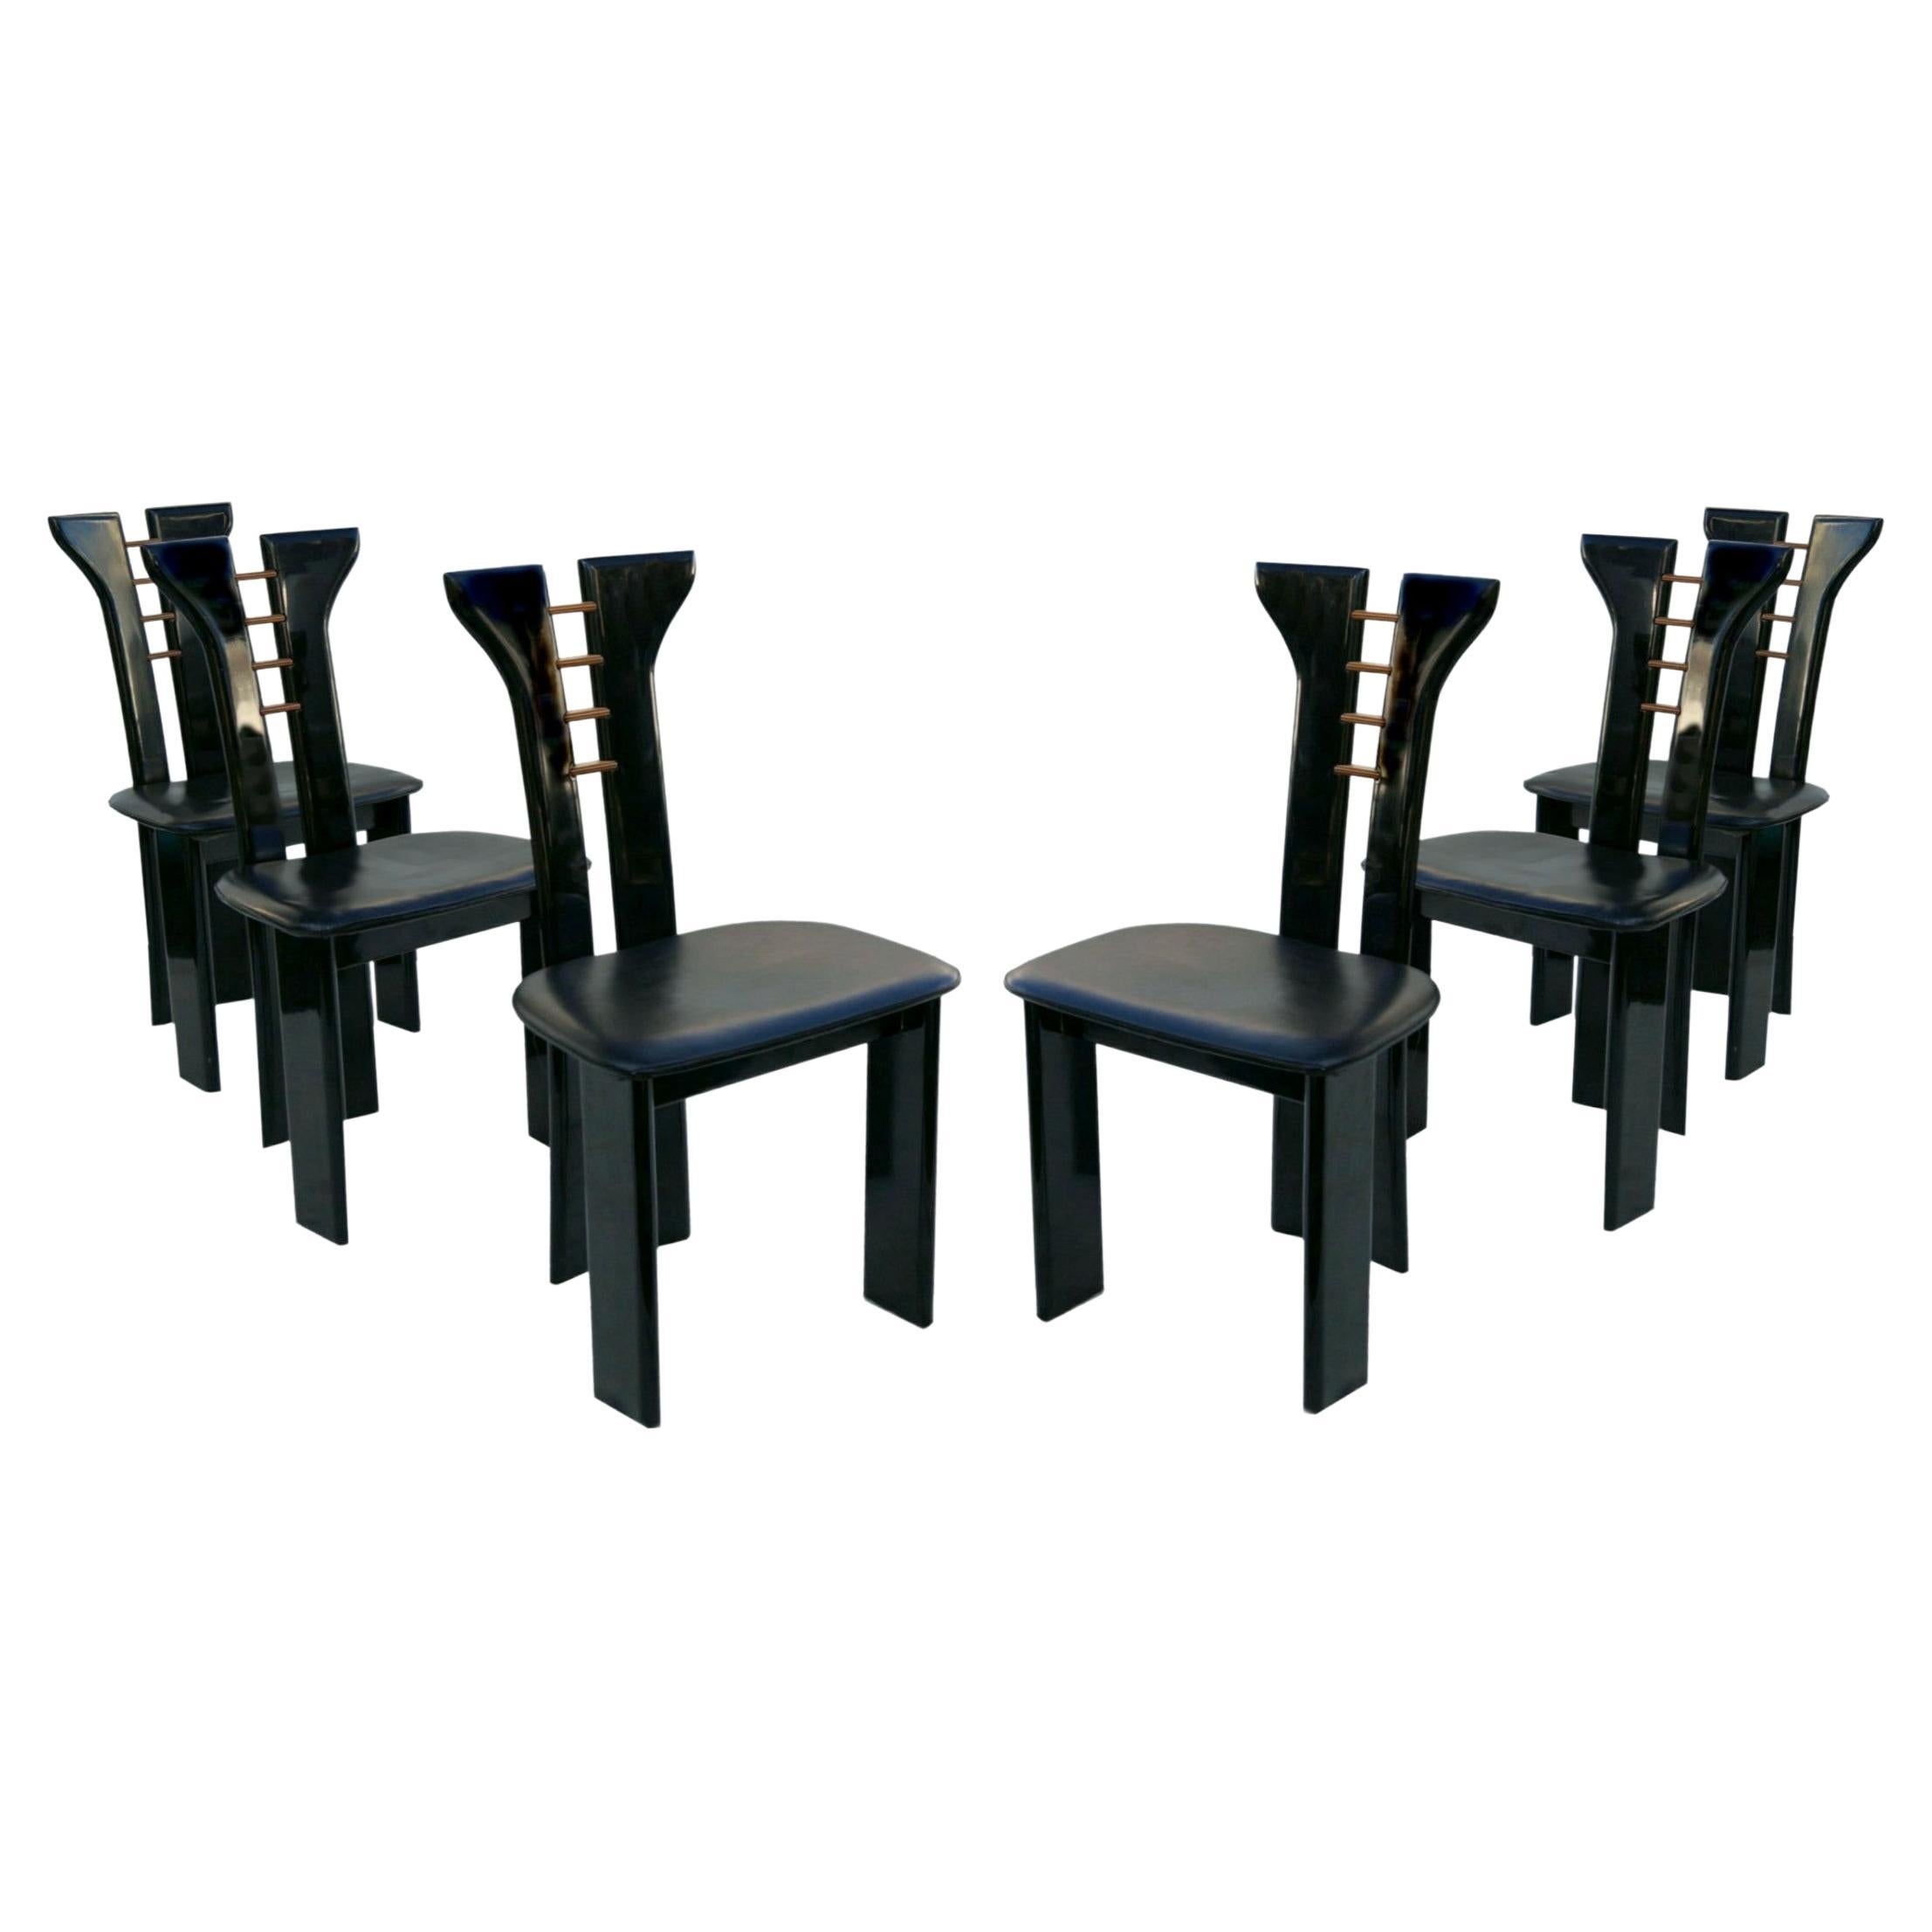 6 Pierre Cardin Roche Bobois Italian Black Lacquer Dining Room Conference Chairs